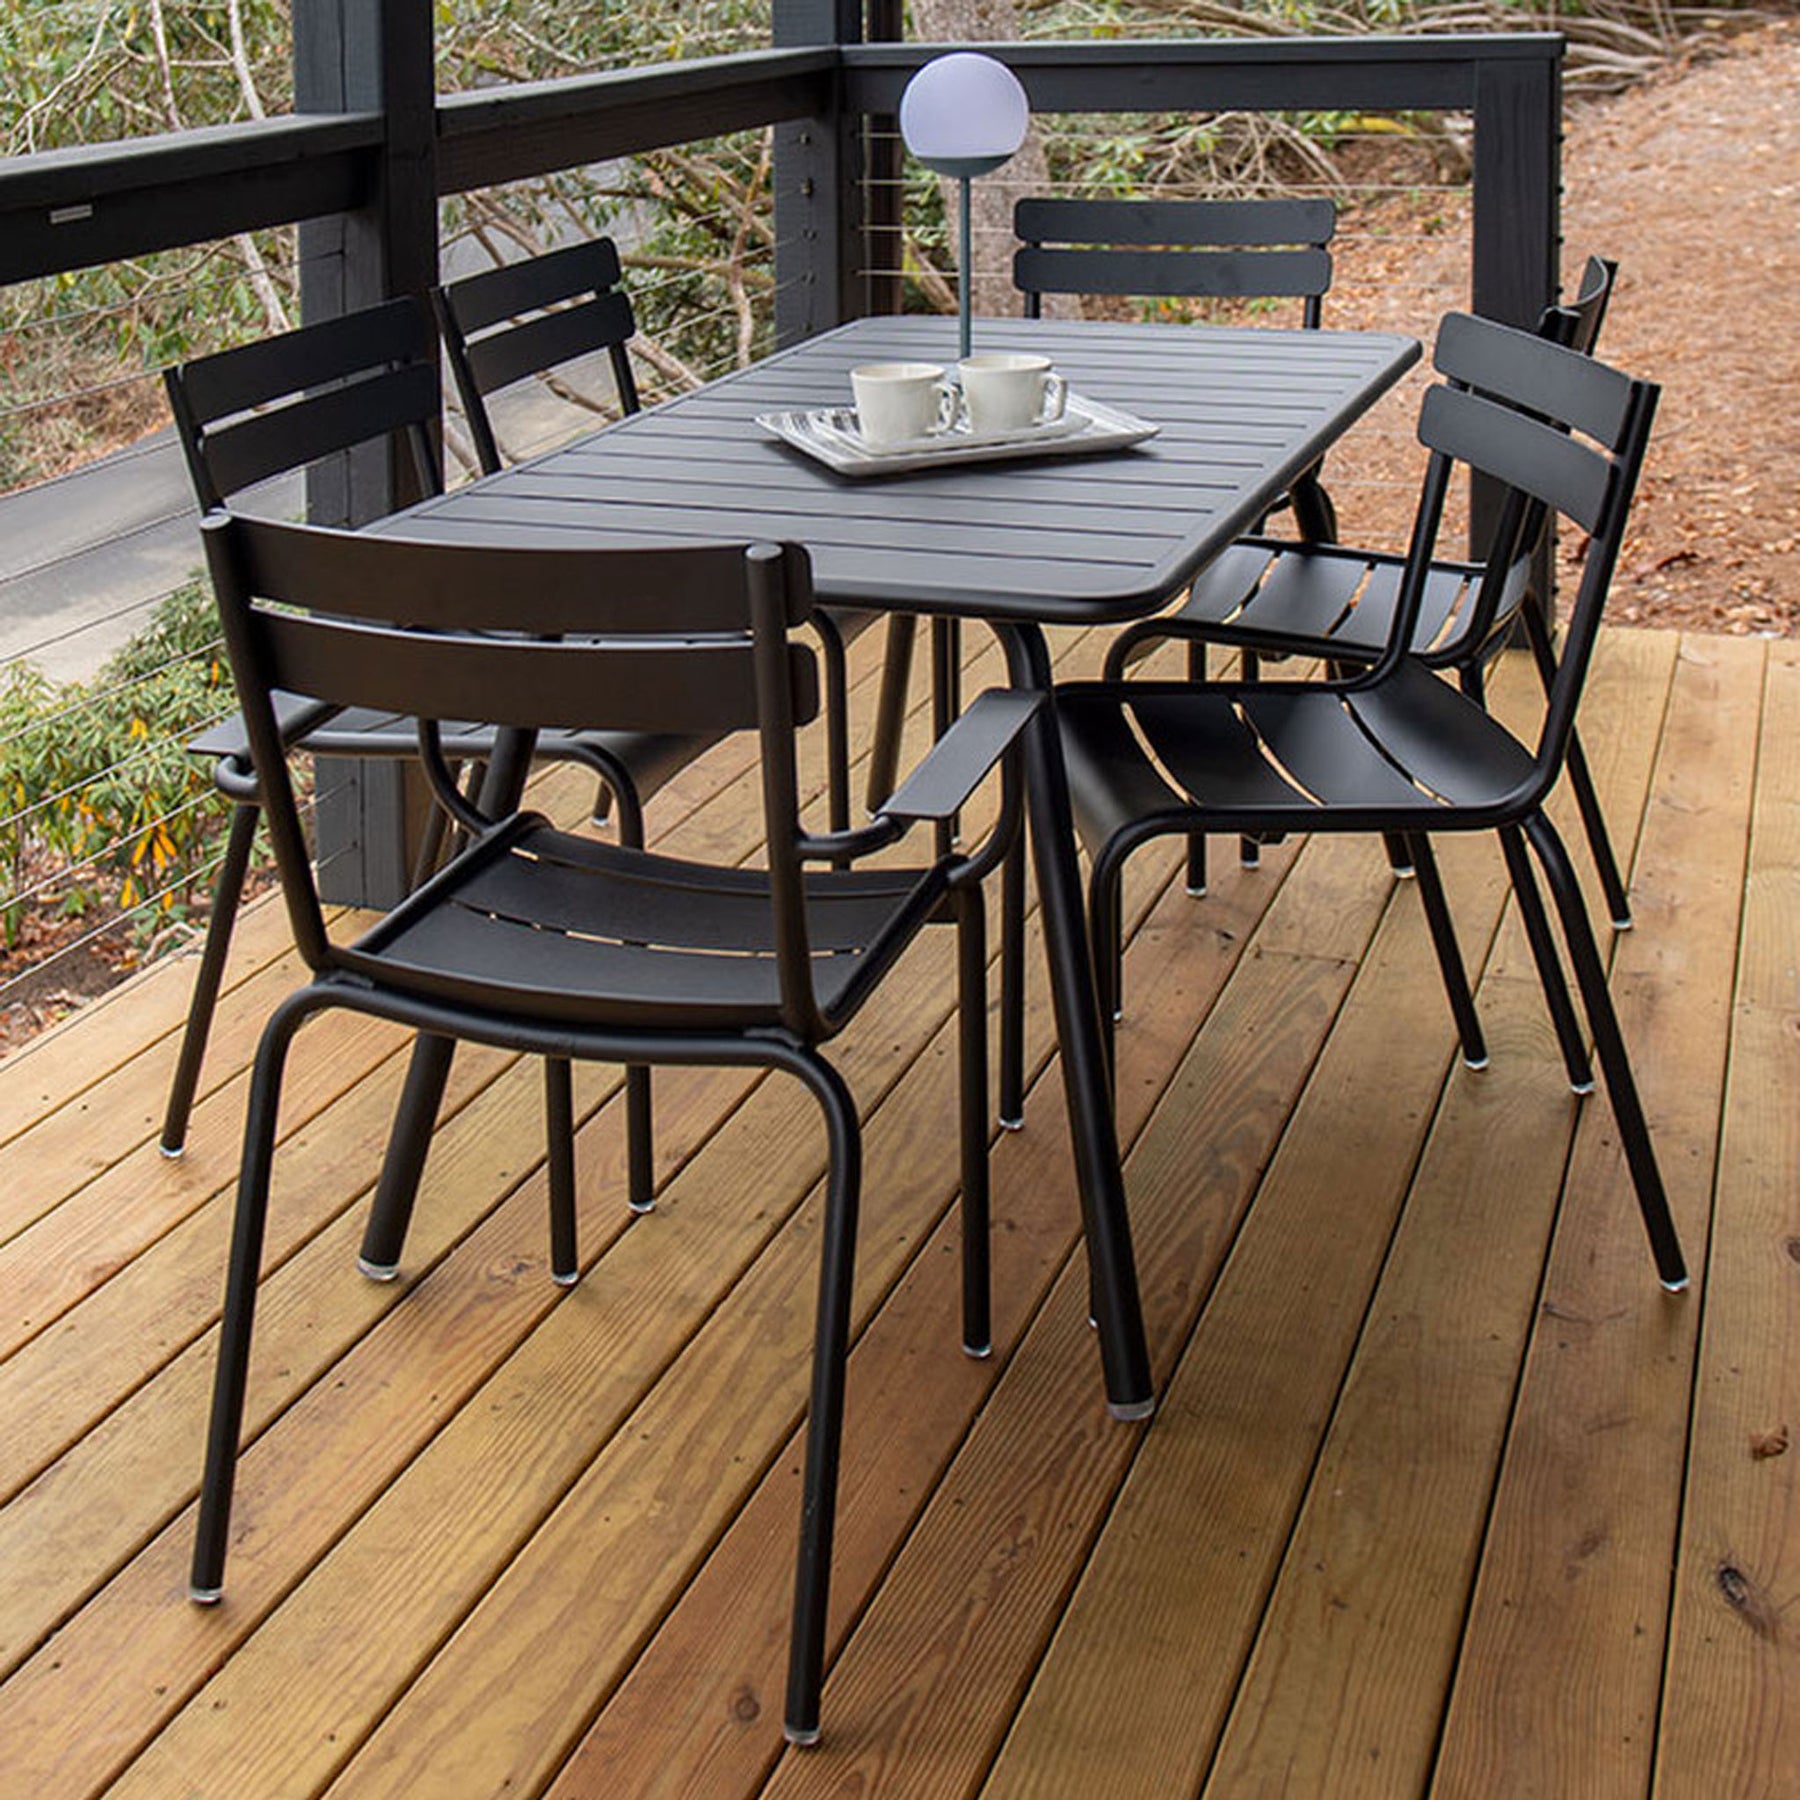 Luxembourg Outdoor Table in Anthracite by Fermob (65”x 39“)